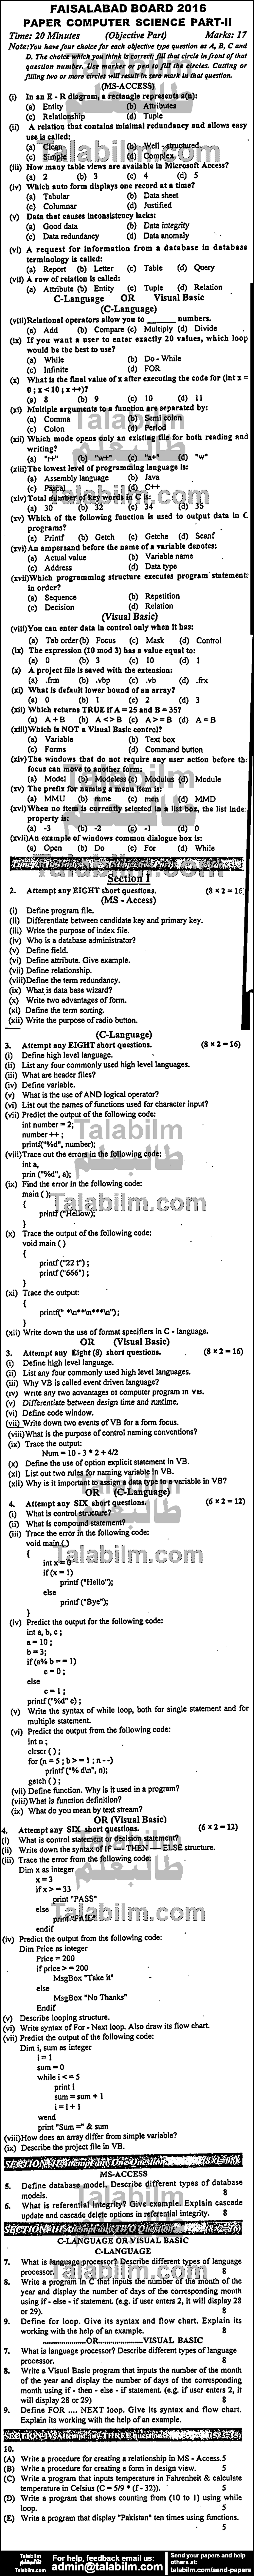 Computer Science 0 past paper for Group-I 2016